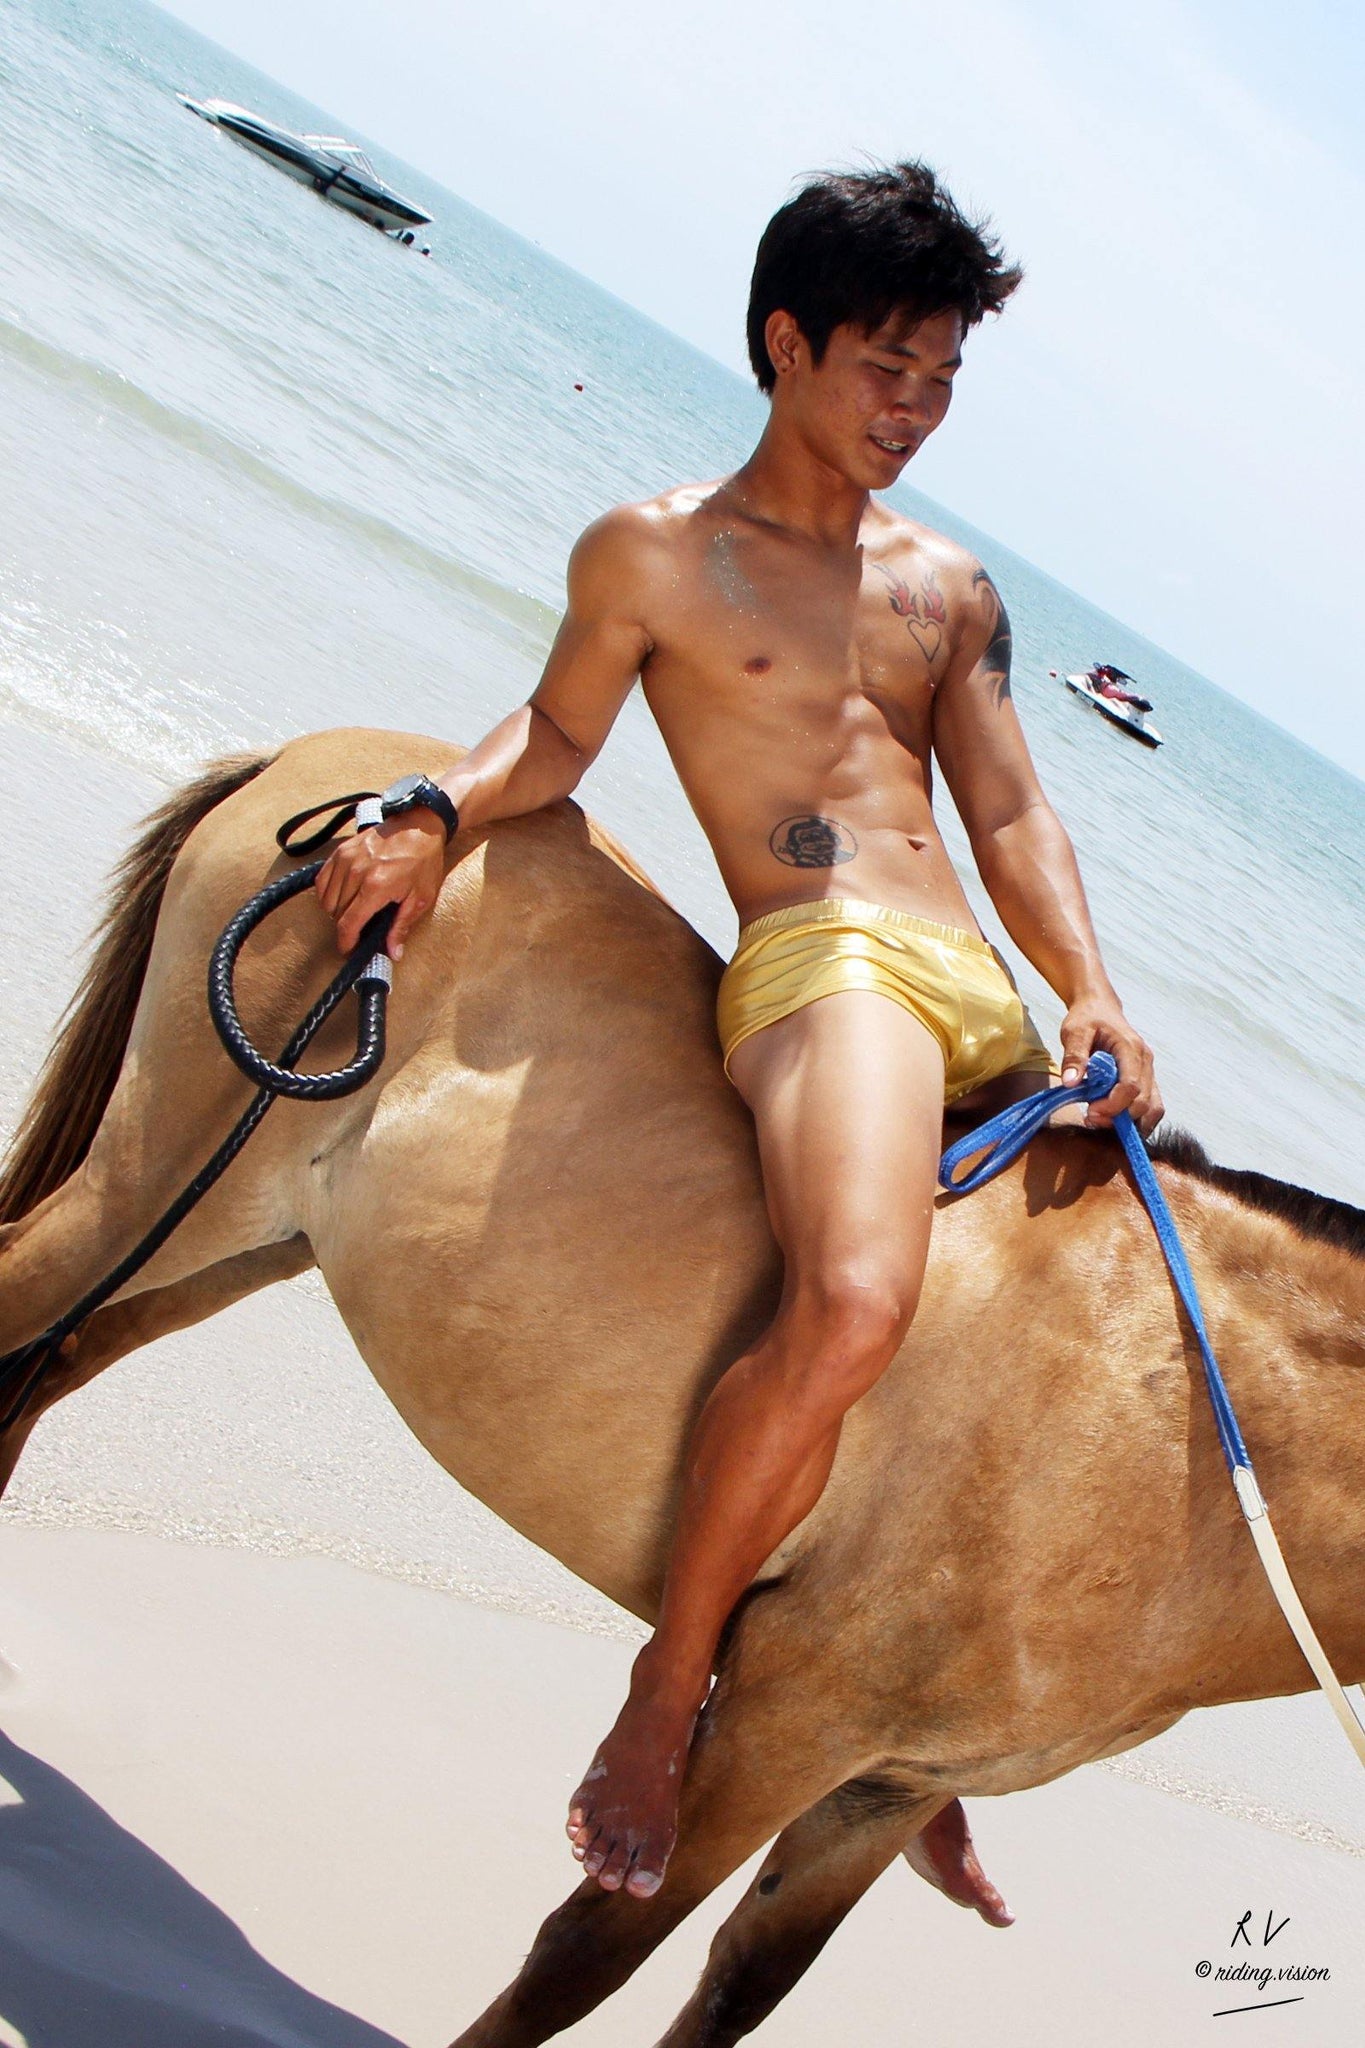 Free Sample Gallery: David in Golden Speedos Riding Bareback on Golden Pony, Part 2 - Riding.Vision